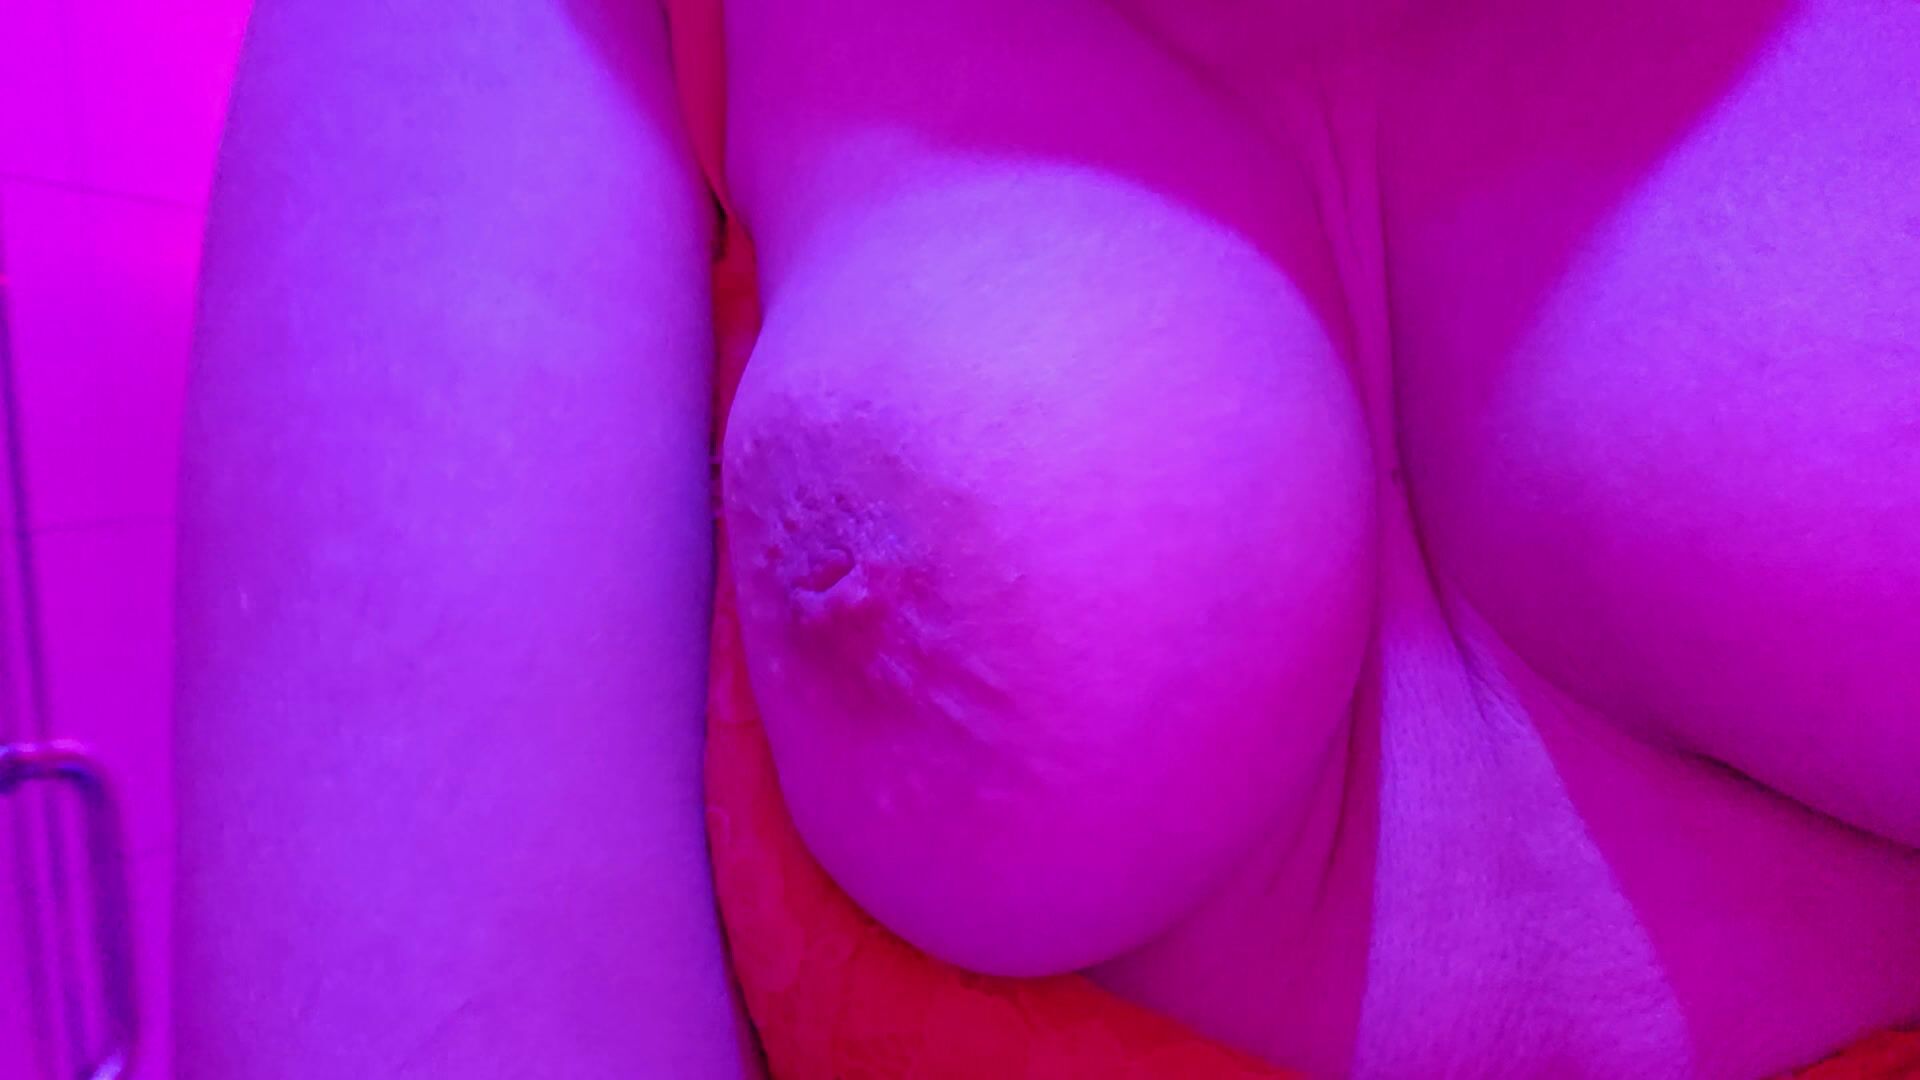 Tits.and pussy tease:p